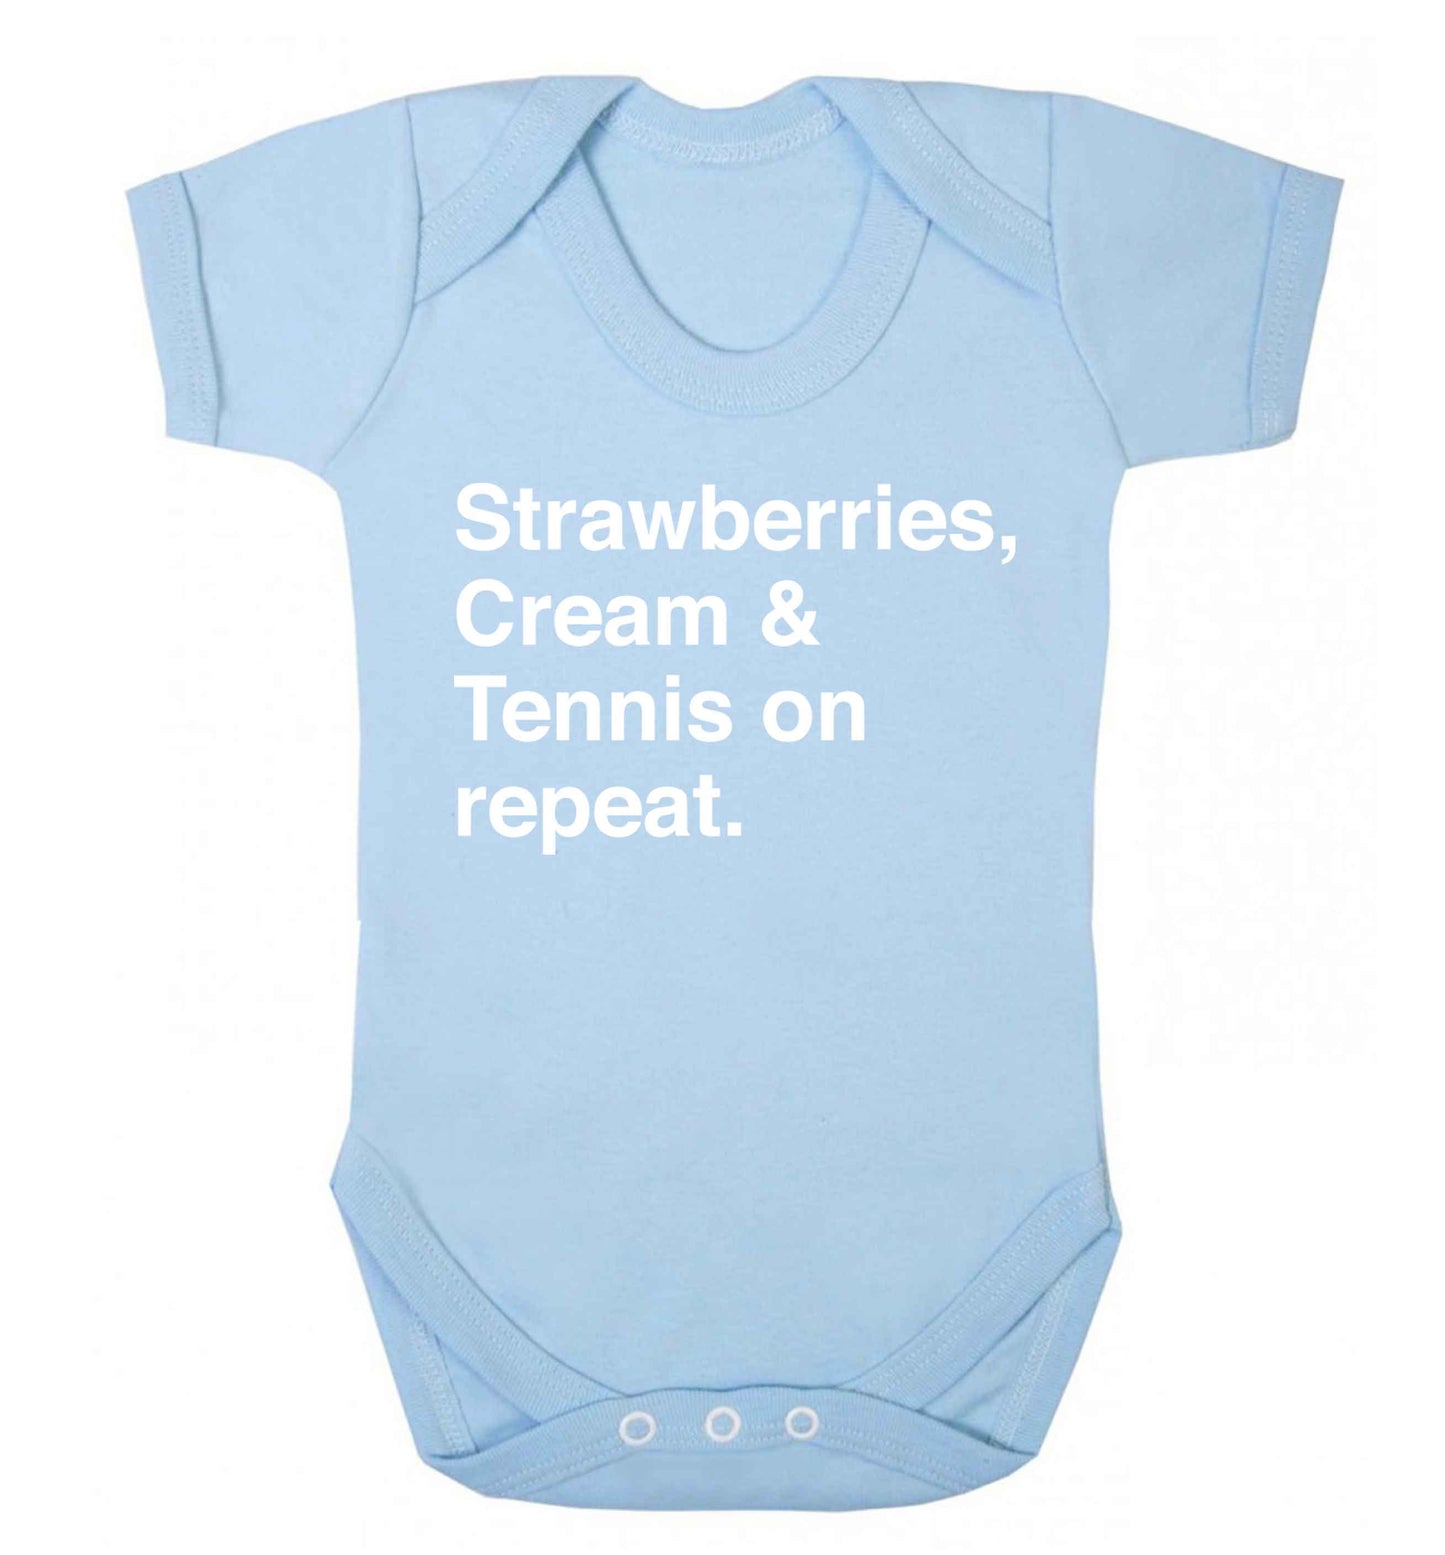 Strawberries, cream and tennis on repeat Baby Vest pale blue 18-24 months